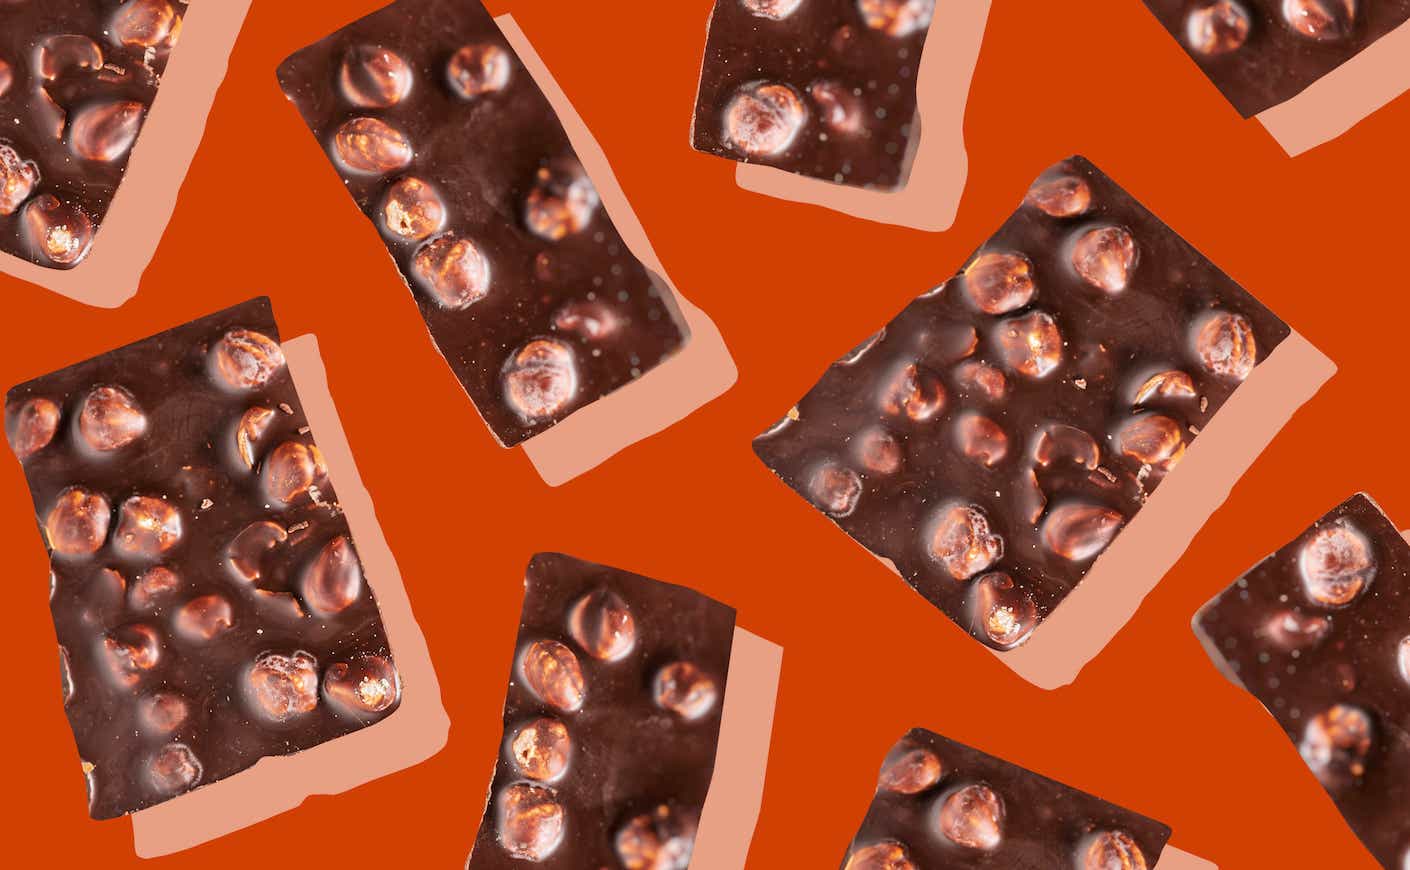 A collage of chocolate bars covered in nuts